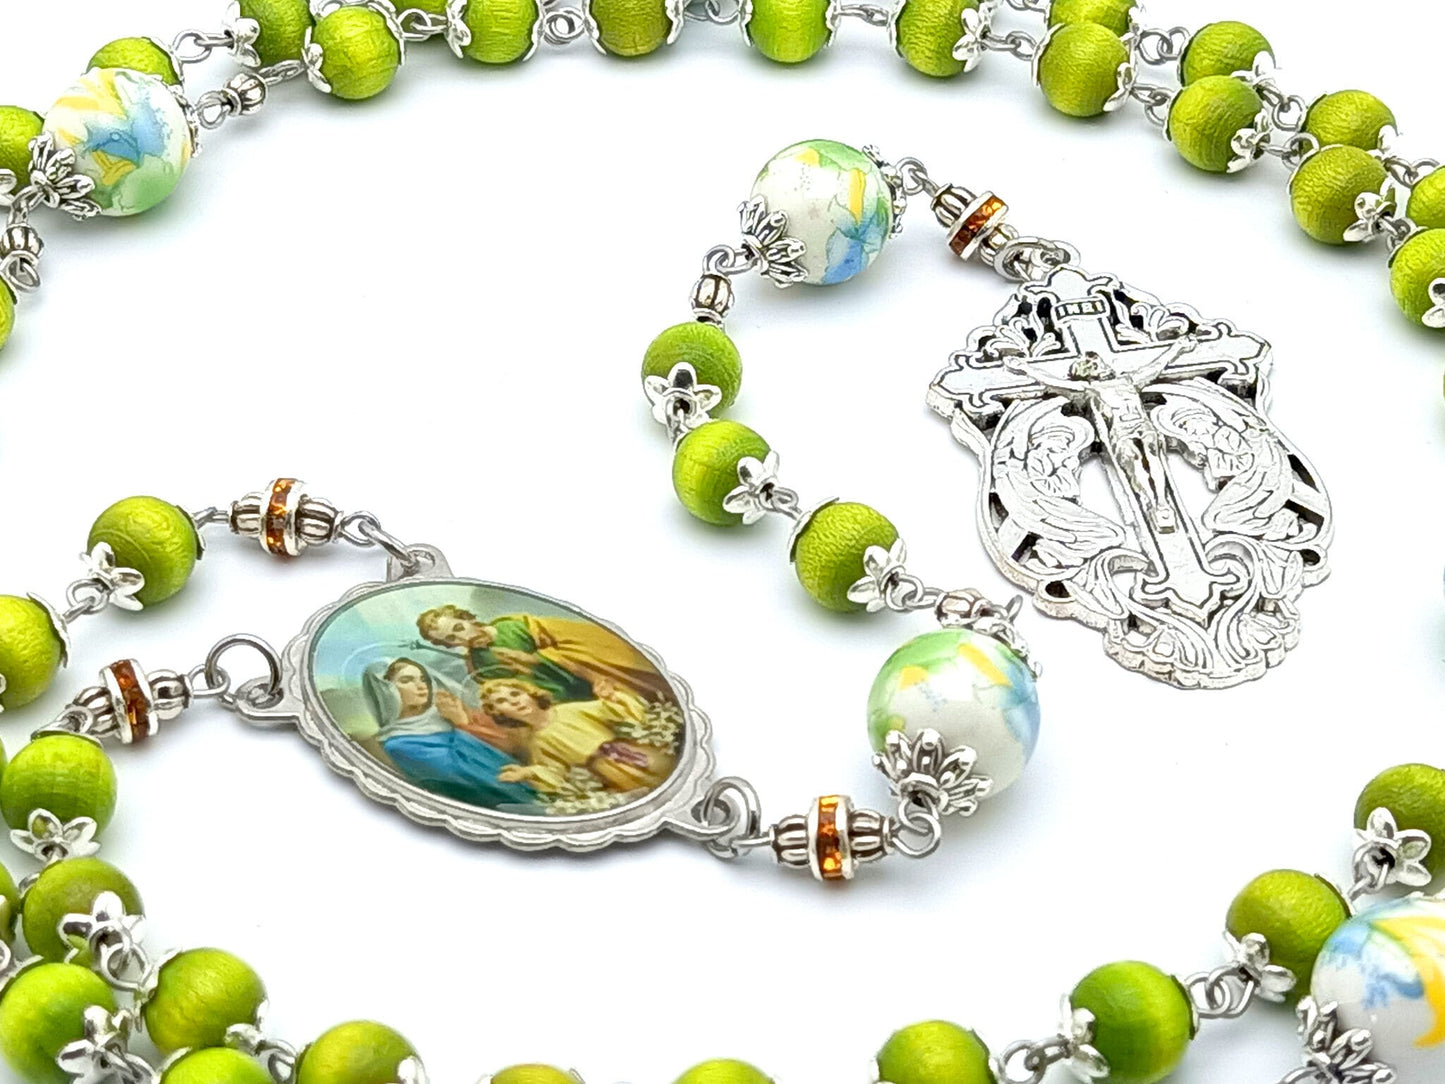 Holy Family unique rosary beads with green wooden and floral porcelain beads, silver two Marys crucifix and picture centre medal.